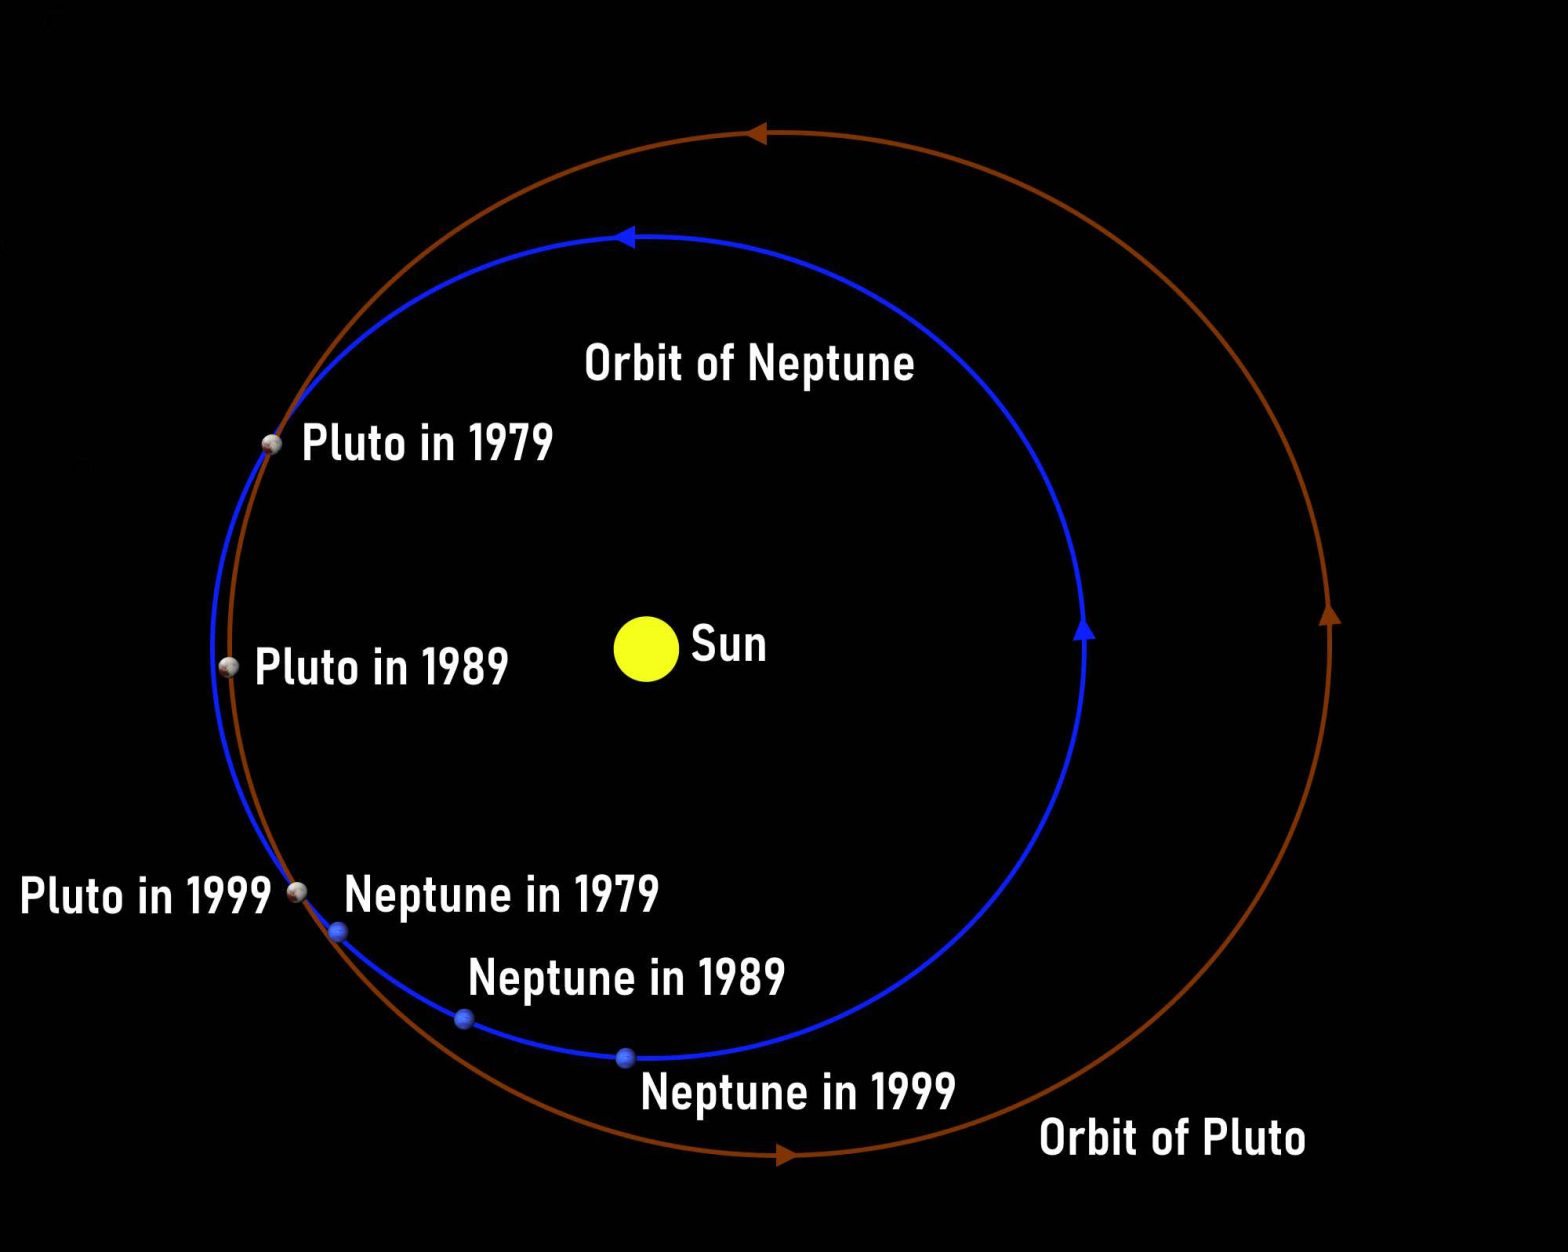 Between 1979 and 1999, Neptune was the outermost planet in the Solar System. Pluto and Neptune orbits